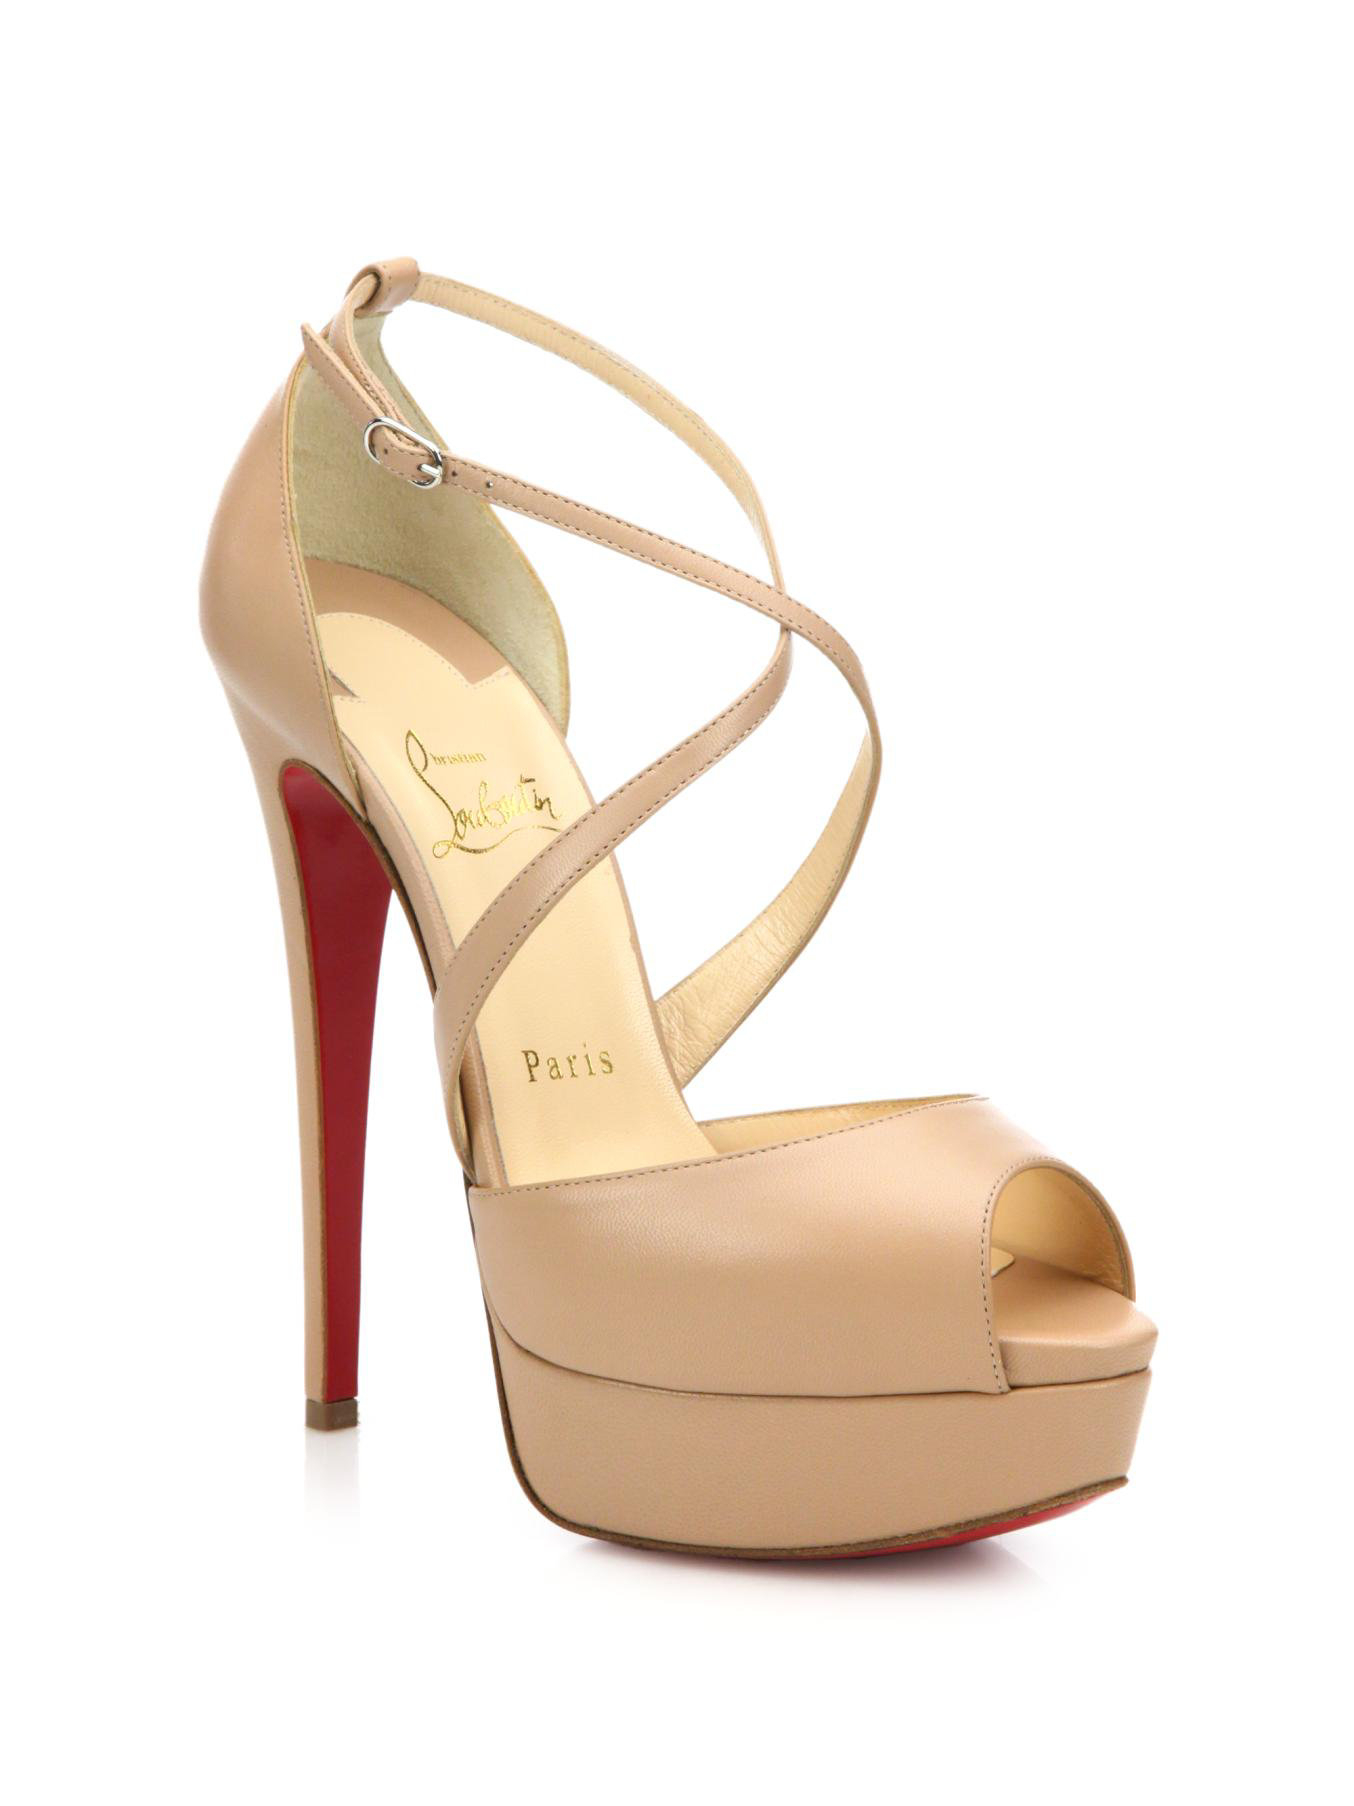 Lyst - Christian Louboutin Cross Me Leather Platform Sandals in Natural